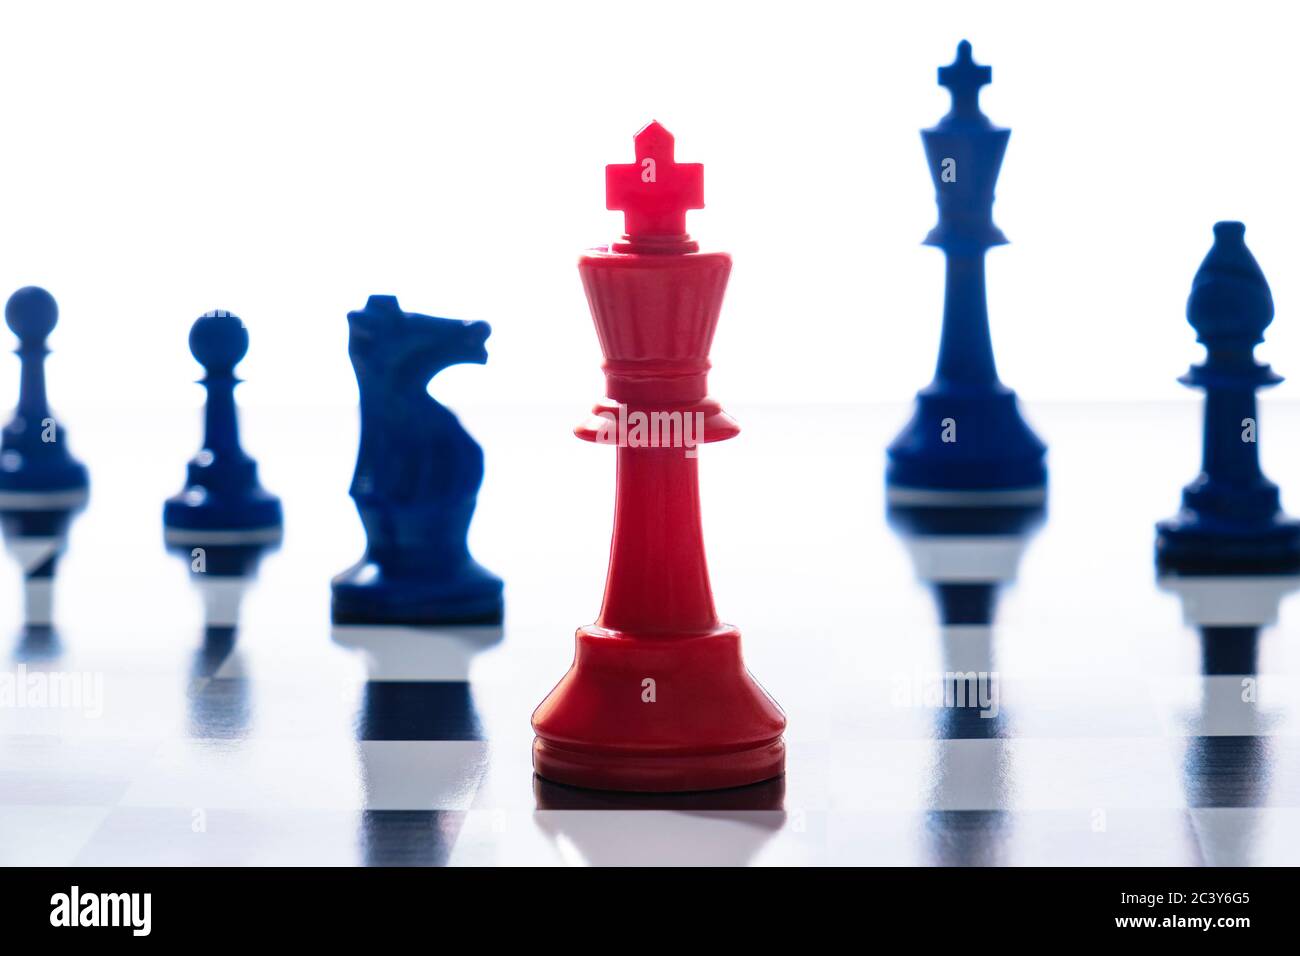 Studio shot of red and blue chess pawns symbolizing US Democratic and Republican parties Stock Photo